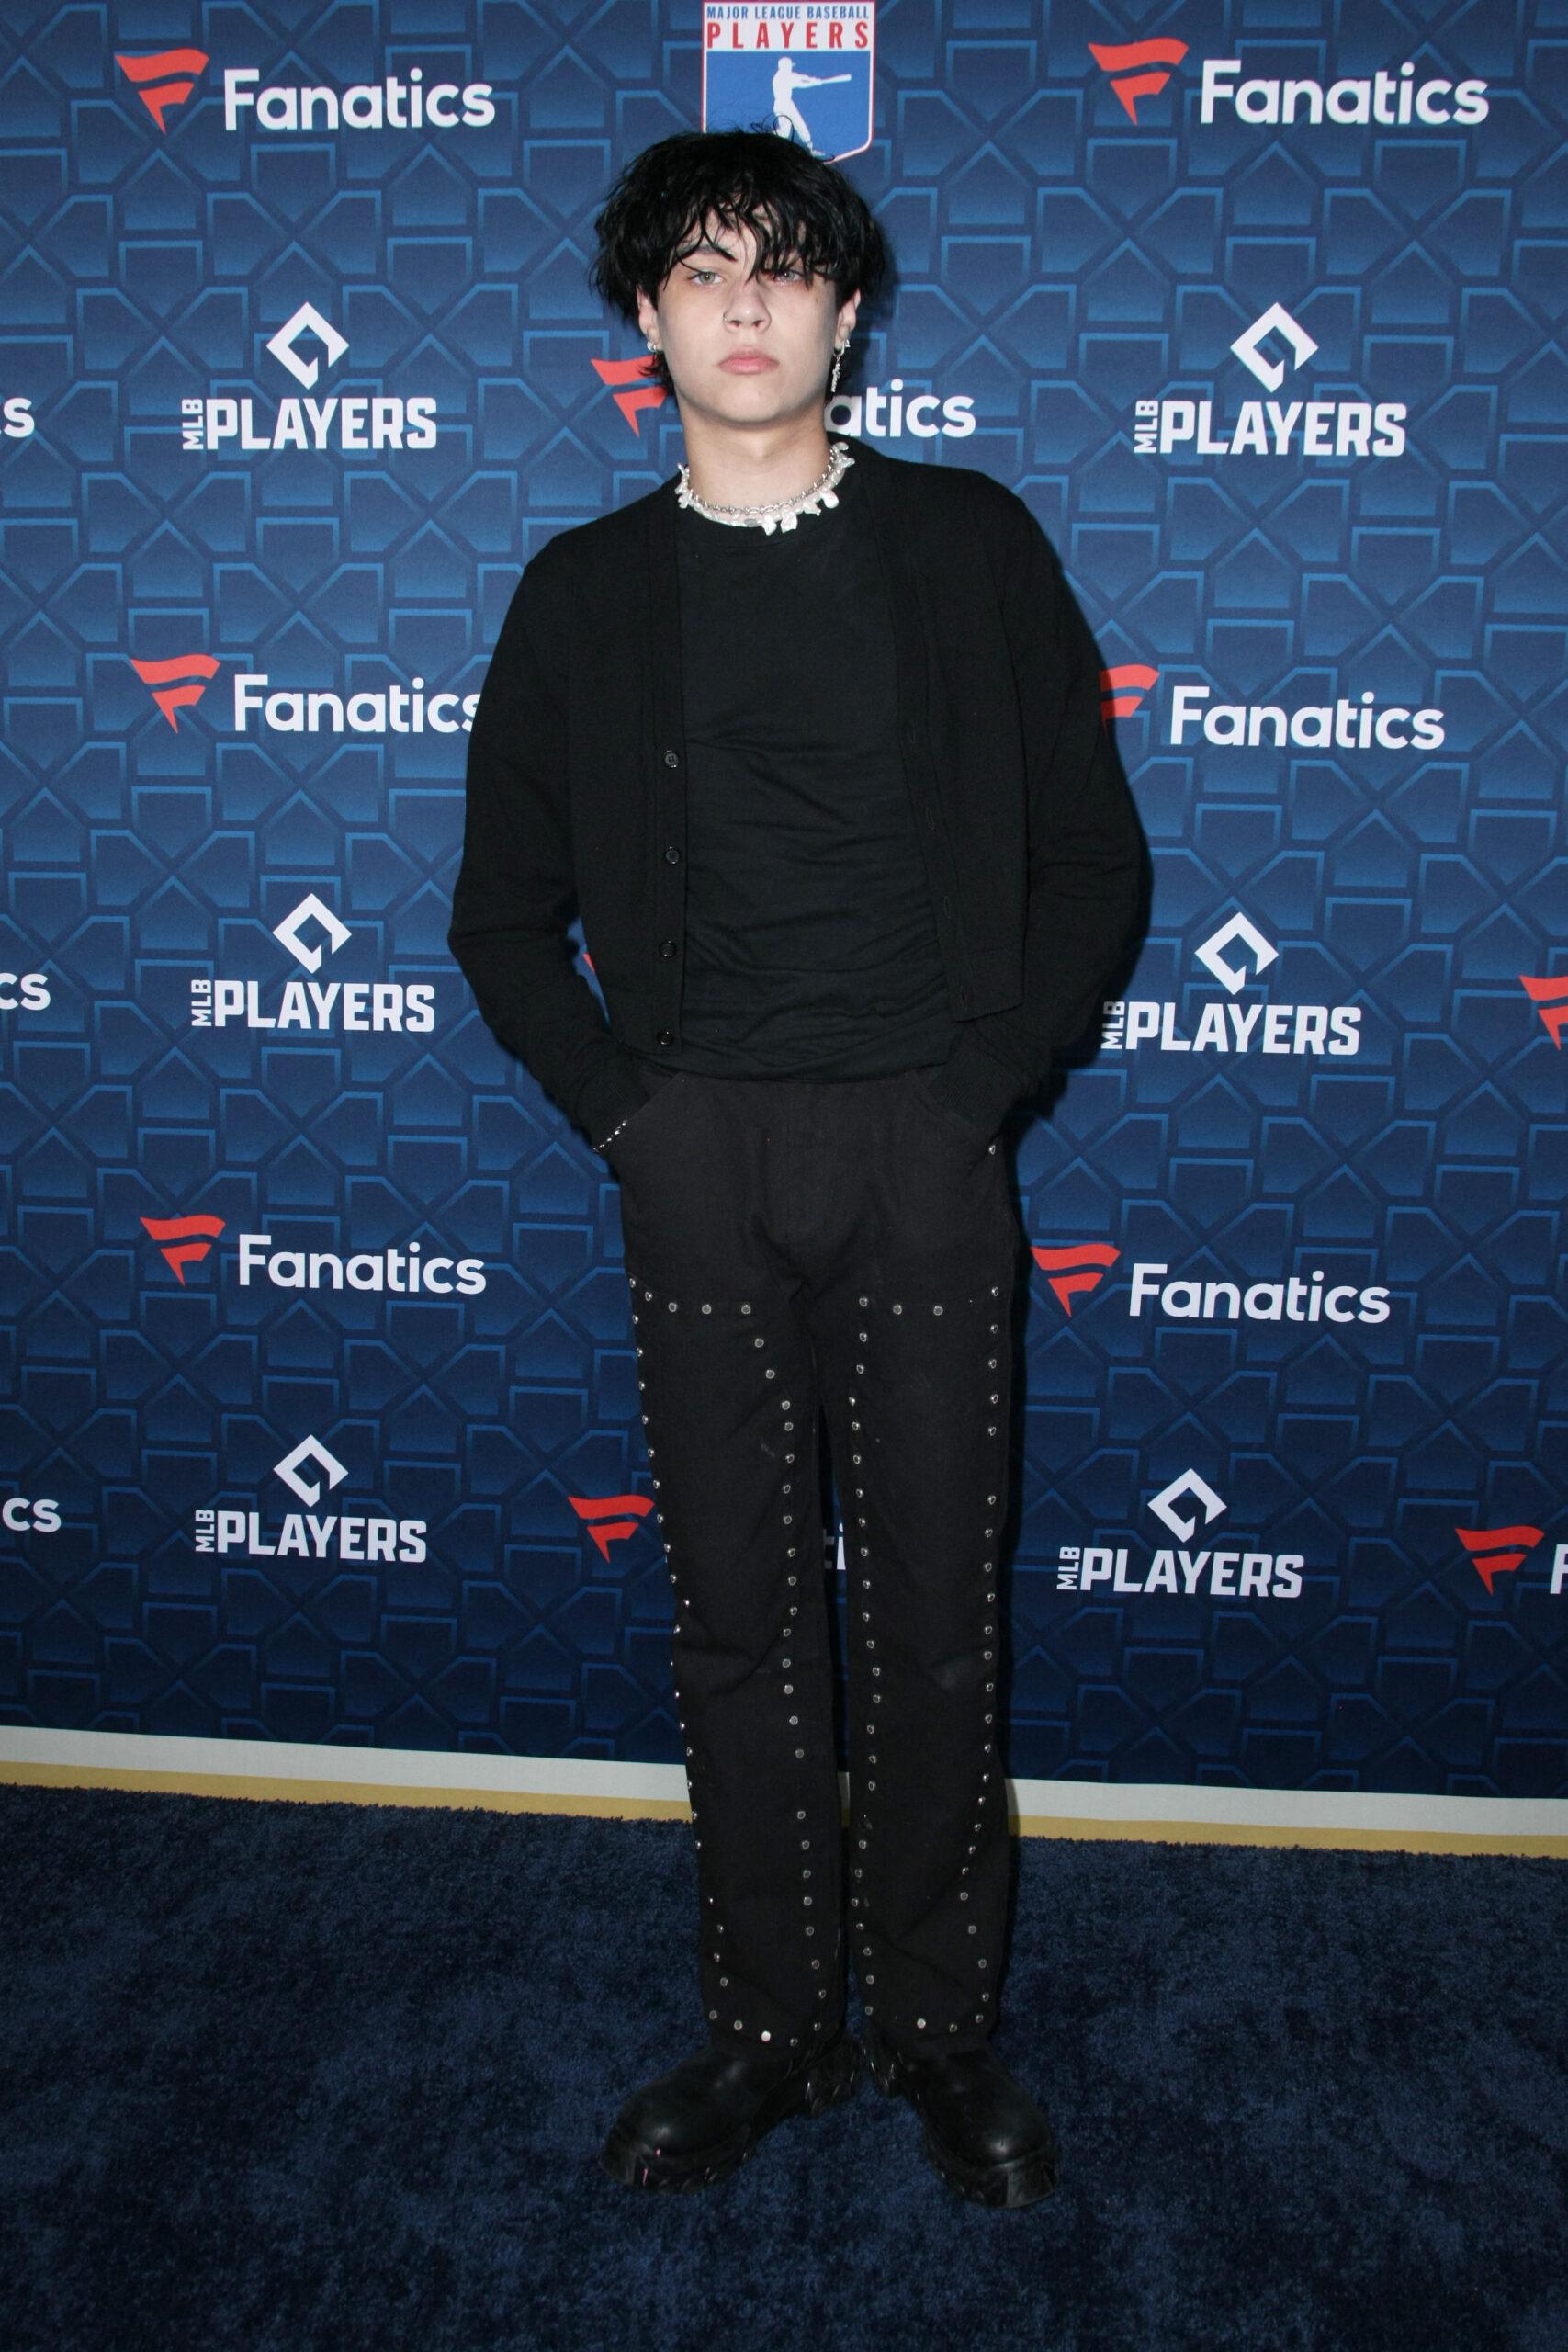 Landon Barker at the Players Party hosted by MLBPA and Fanatics